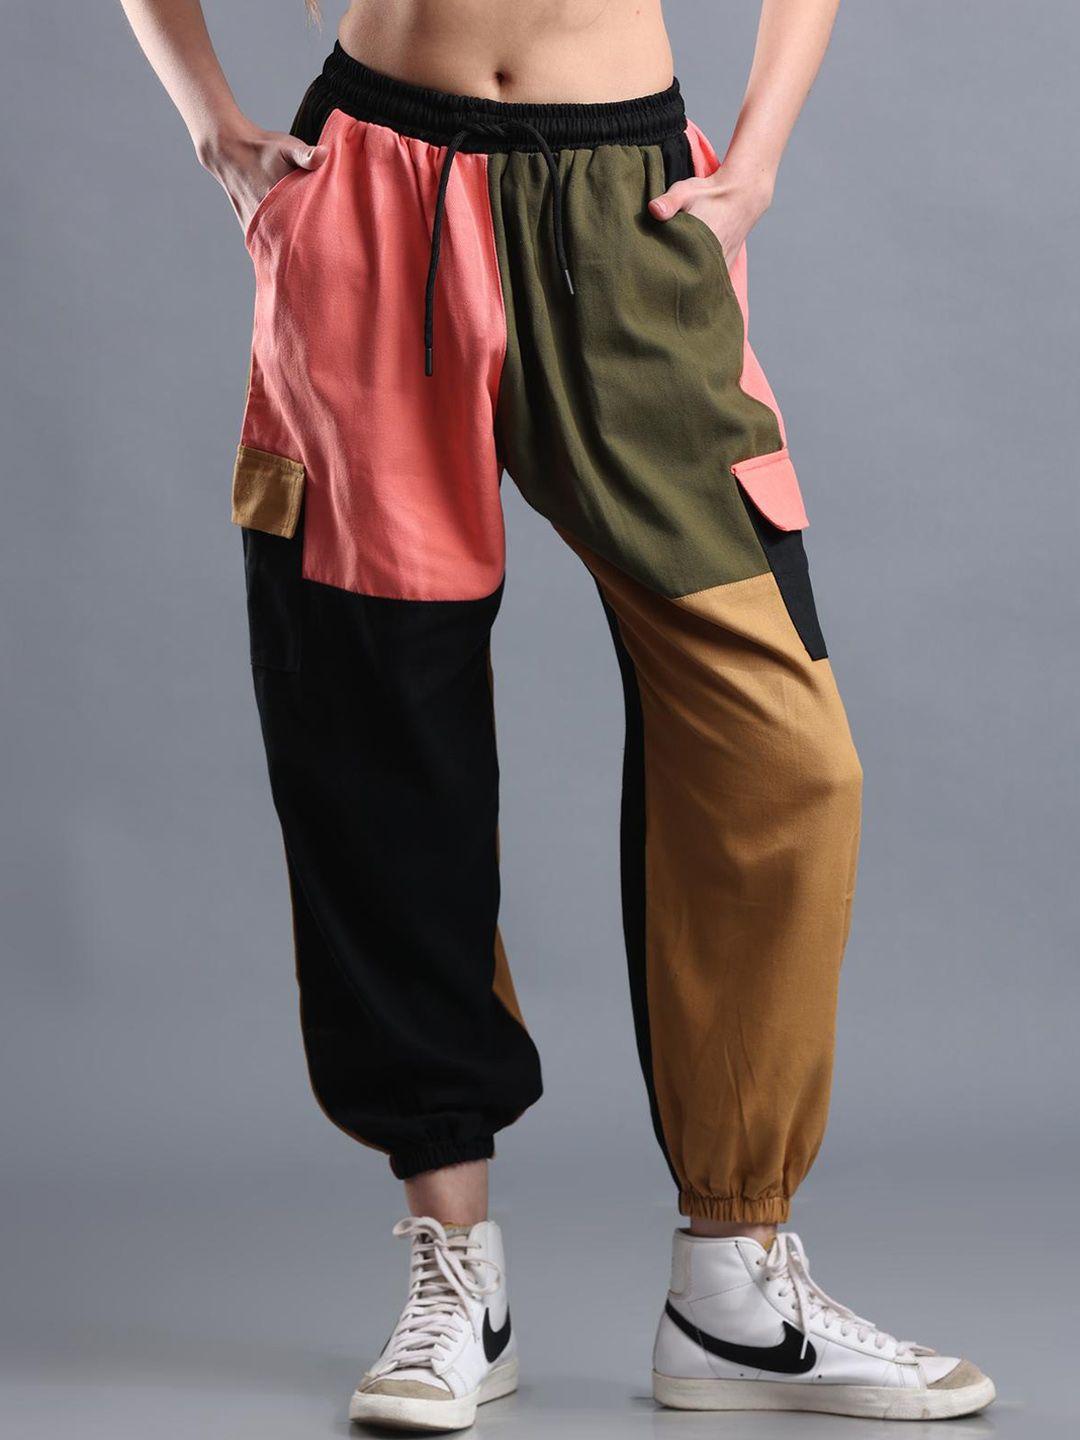 the-dance-bible-women-relaxed-fit-colourblocked-baggy-cotton-anti-odour-joggers